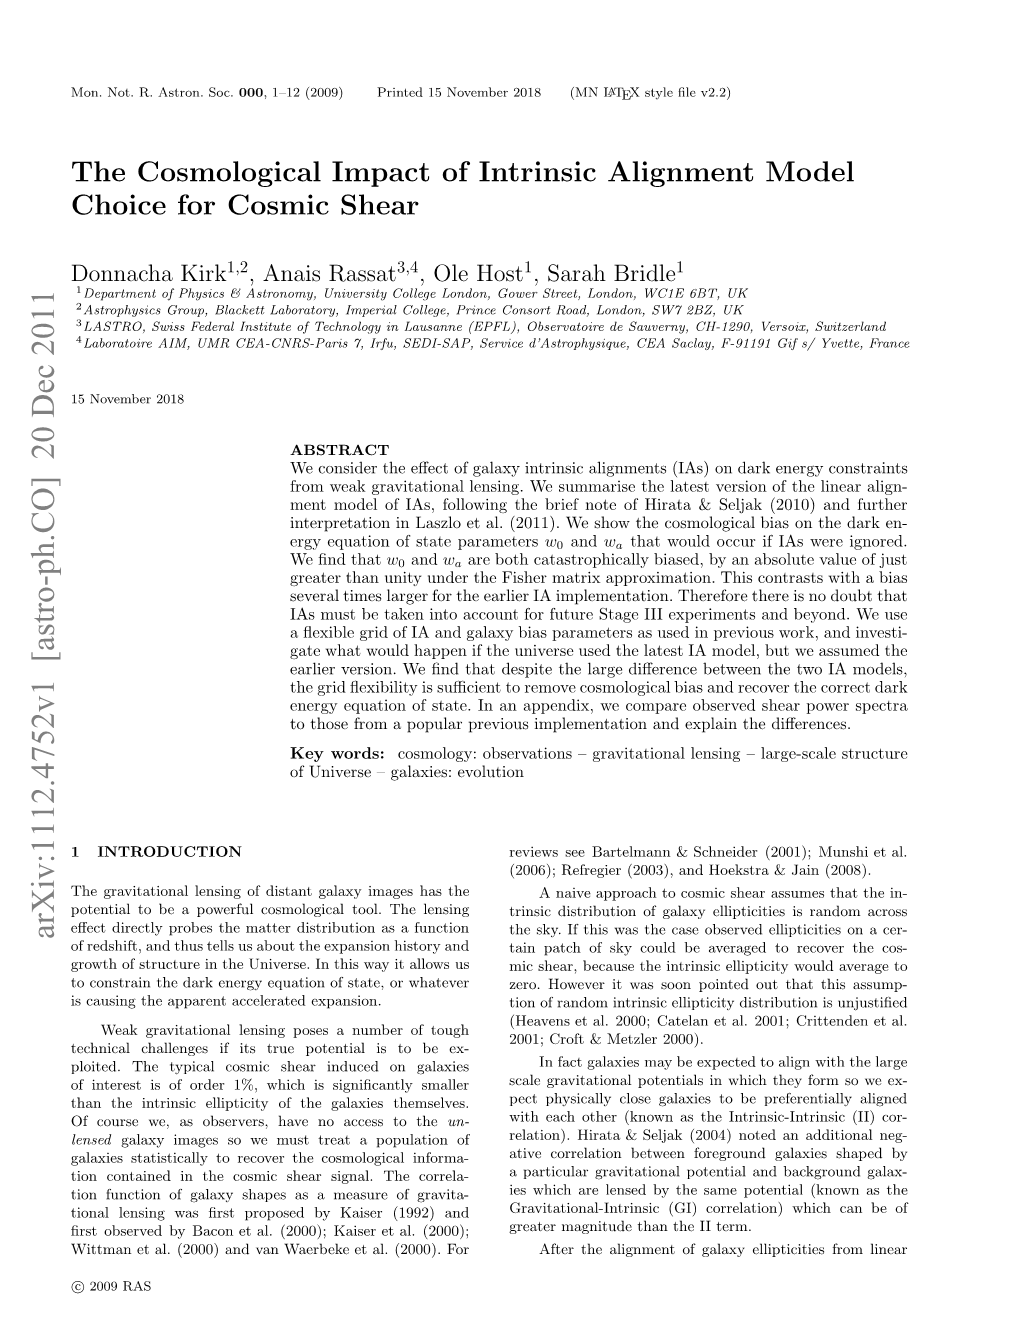 The Cosmological Impact of Intrinsic Alignment Model Choice for Cosmic